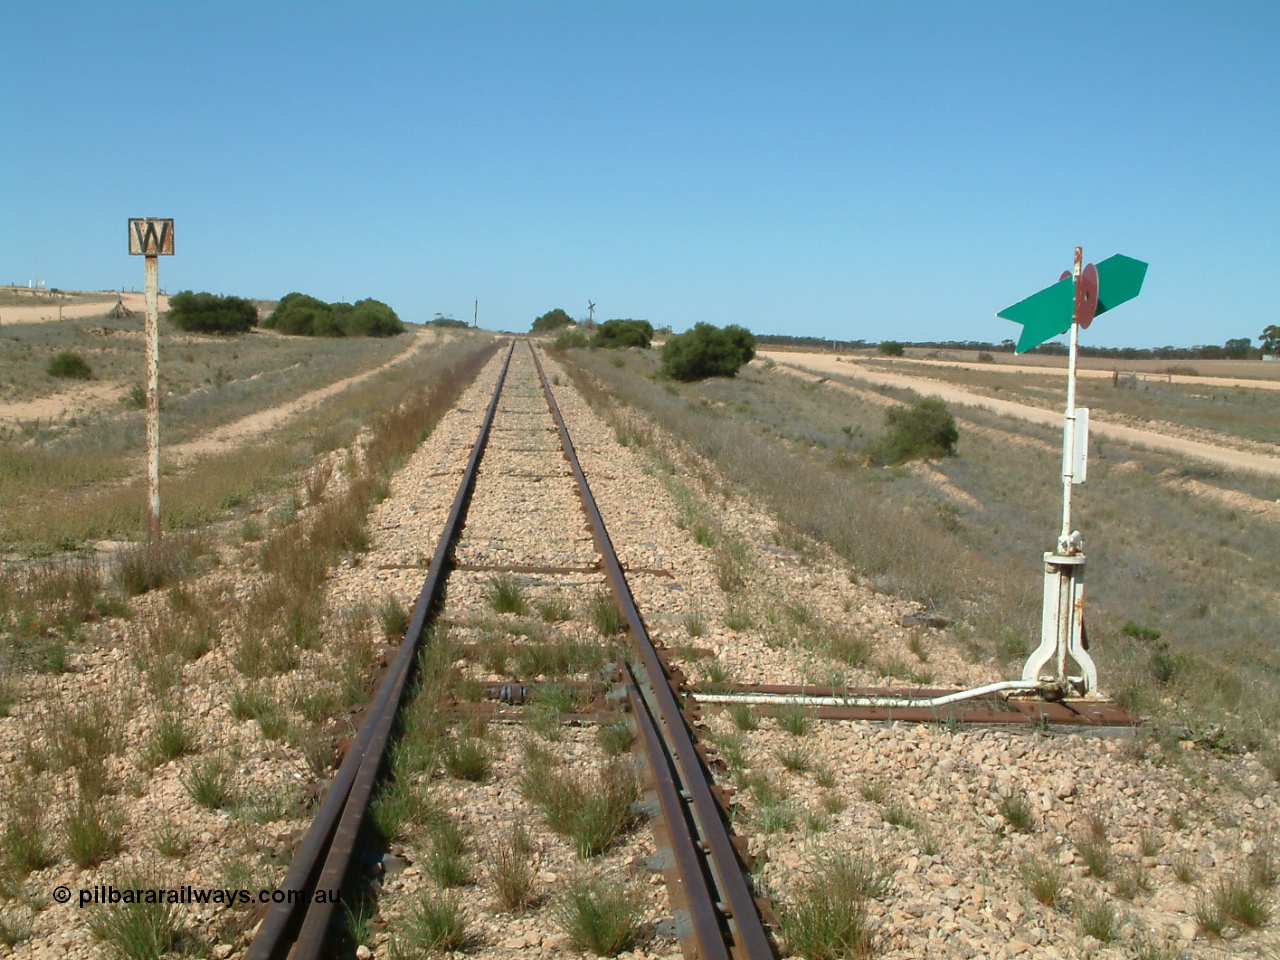 030411 141801
Nunjikompita, looking east from the east end of the yard, W whistle or horn post for grade crossing of Nunyah Road in the distance.
